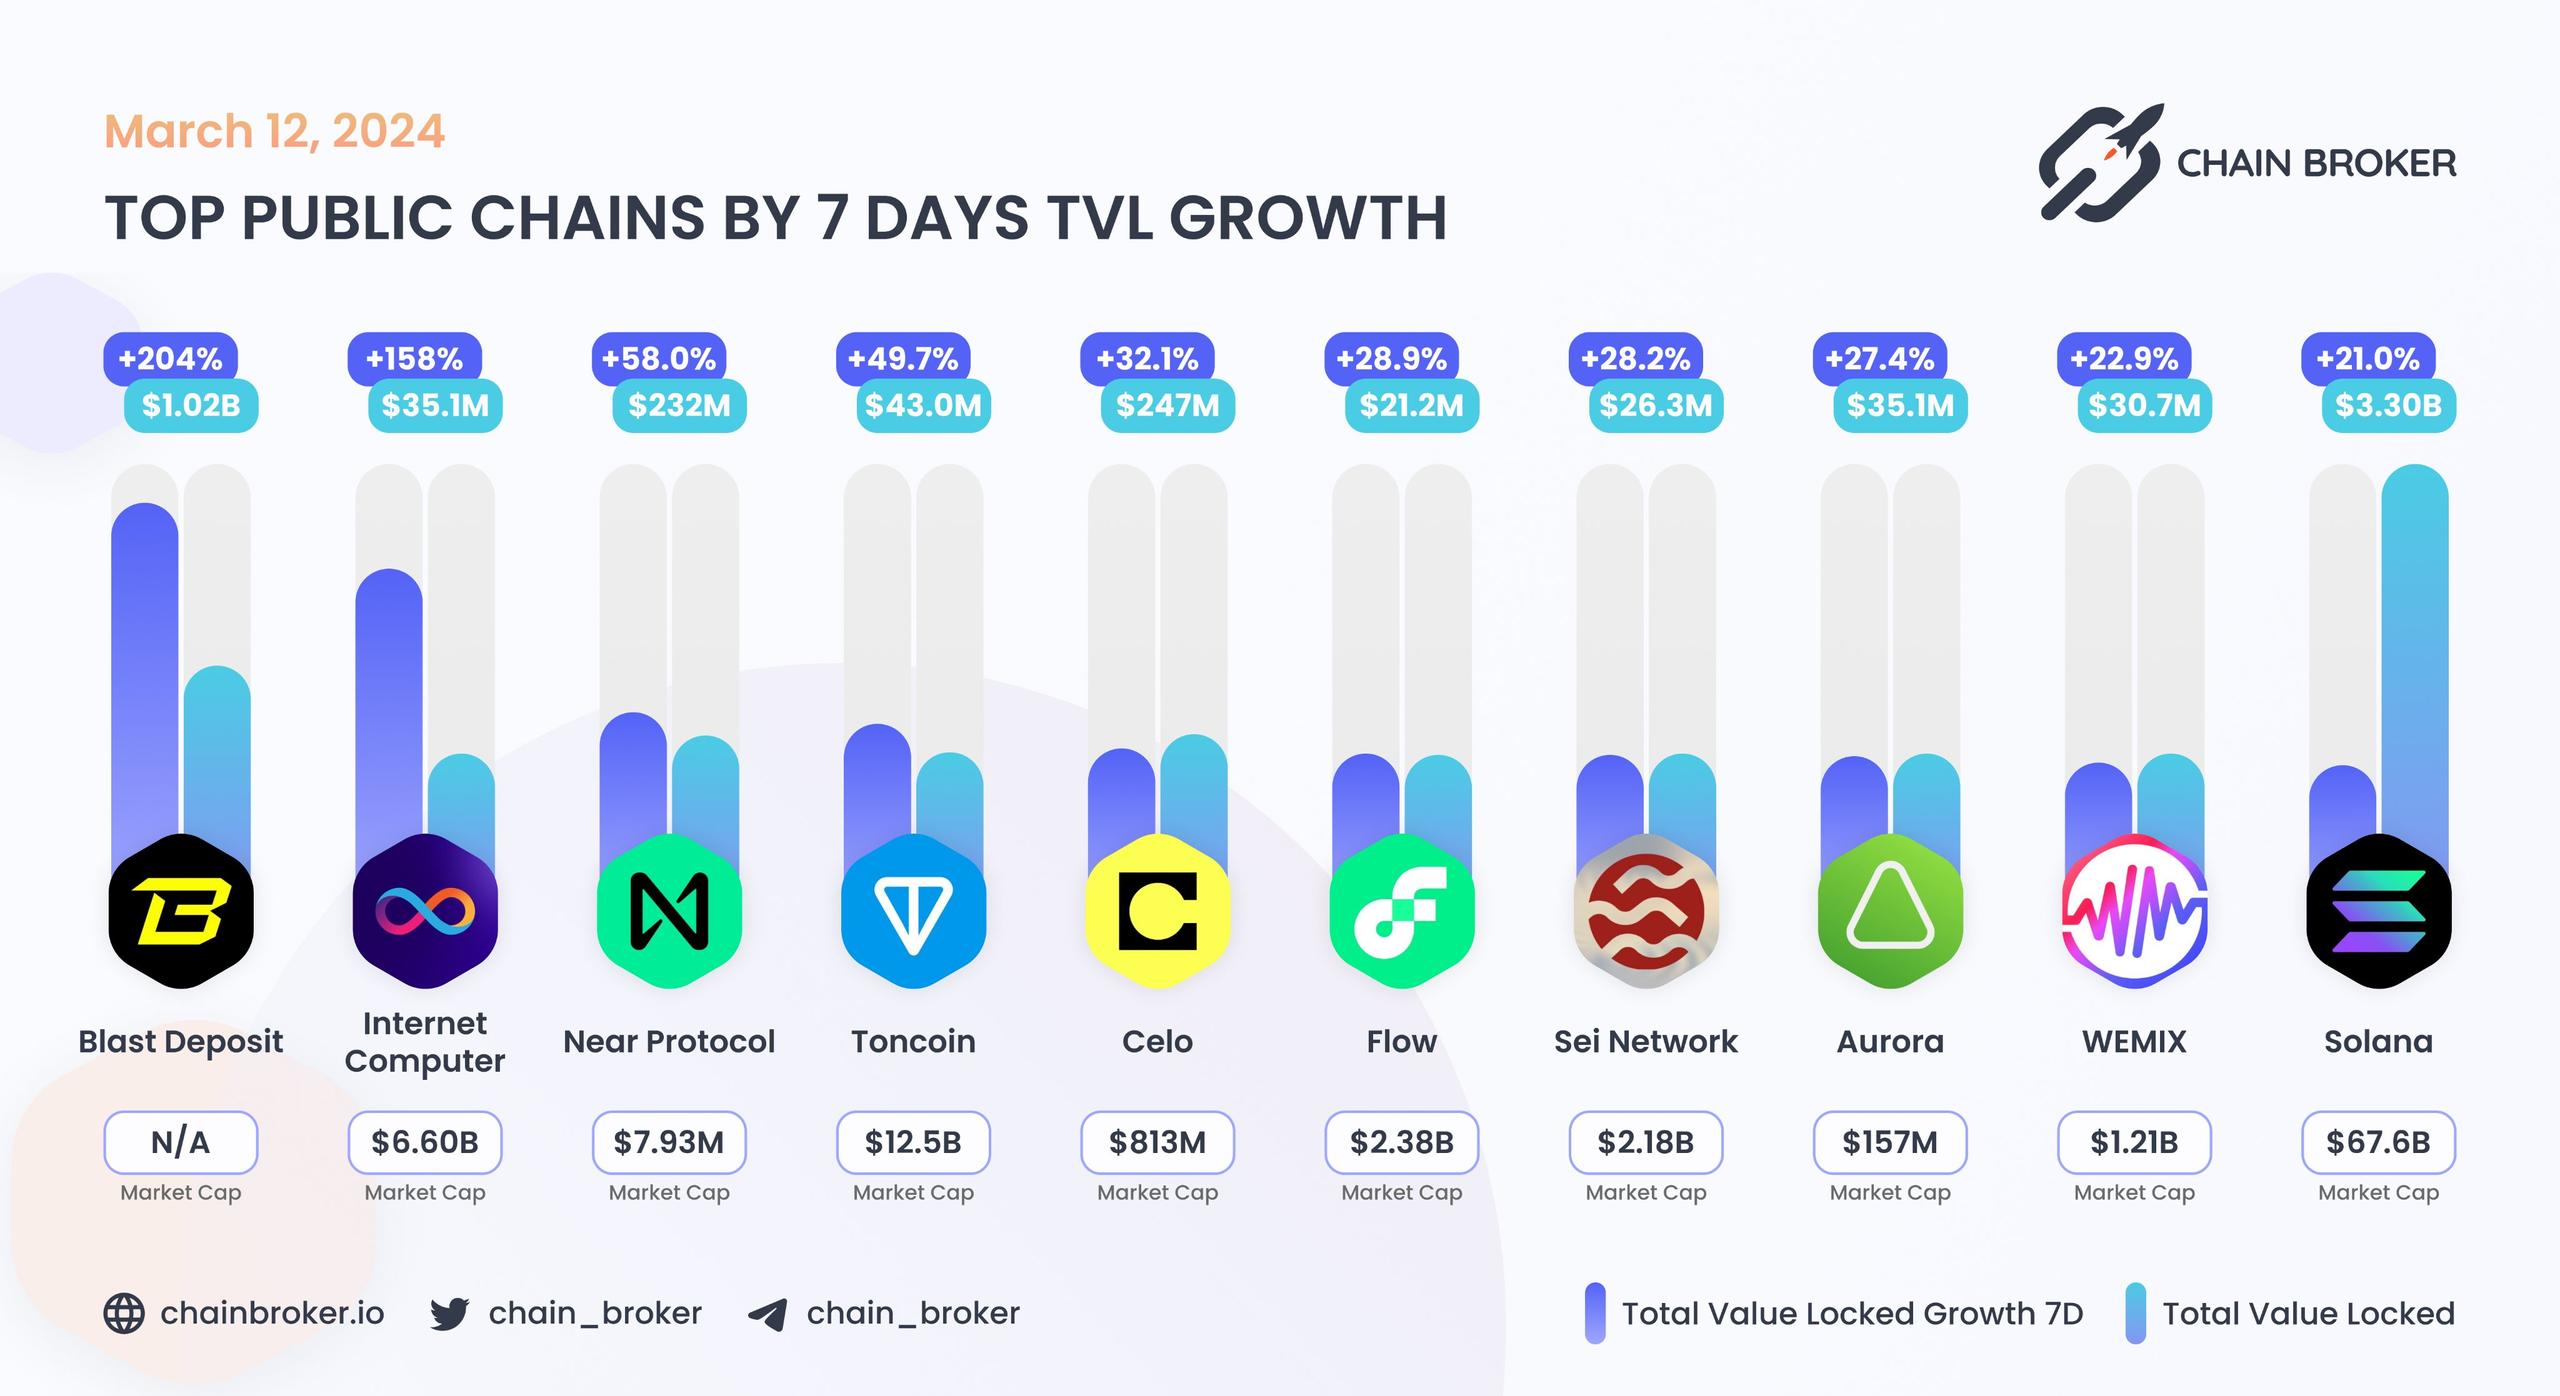 Top public chains by 7 days TVL growth